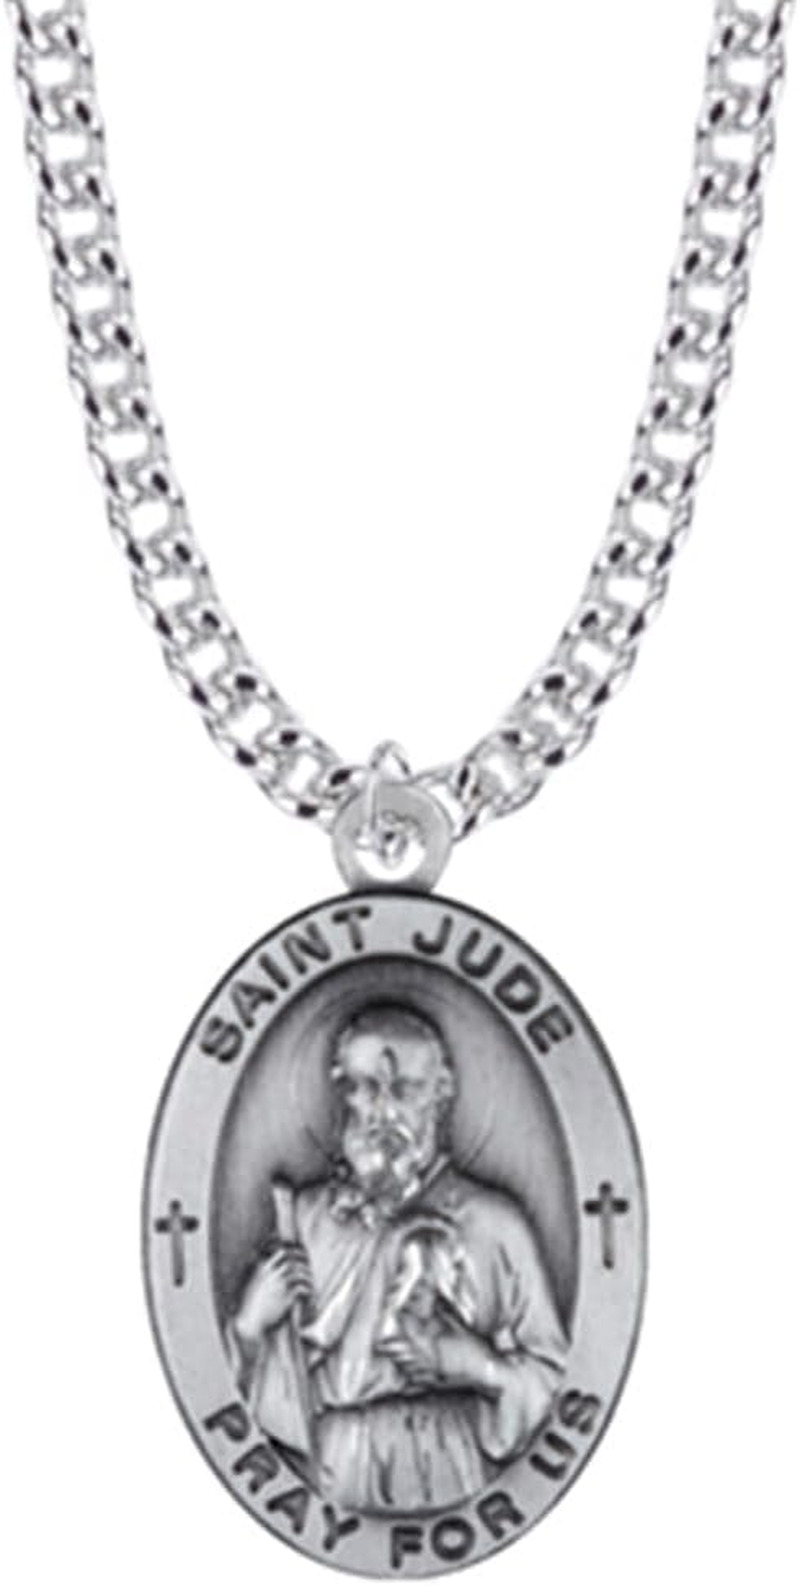 St Jude Necklace Patron Saint of Lost Causes Pendant Sterling Silver Oval Medal 